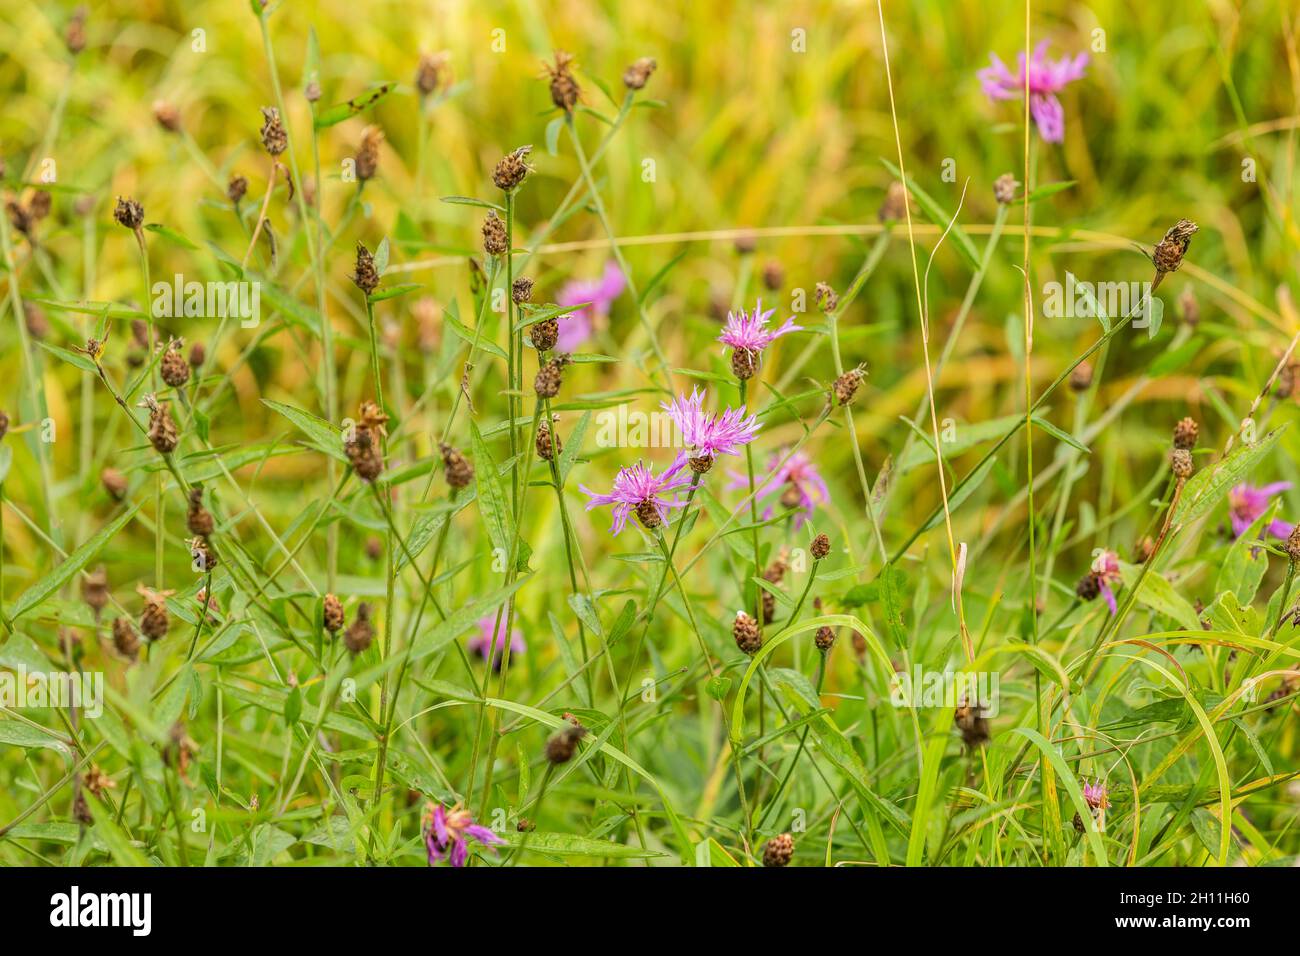 Short-fringed knapweed, Centaurea nigrescens, growing naturally among grasses and other low-growing wild plants Stock Photo